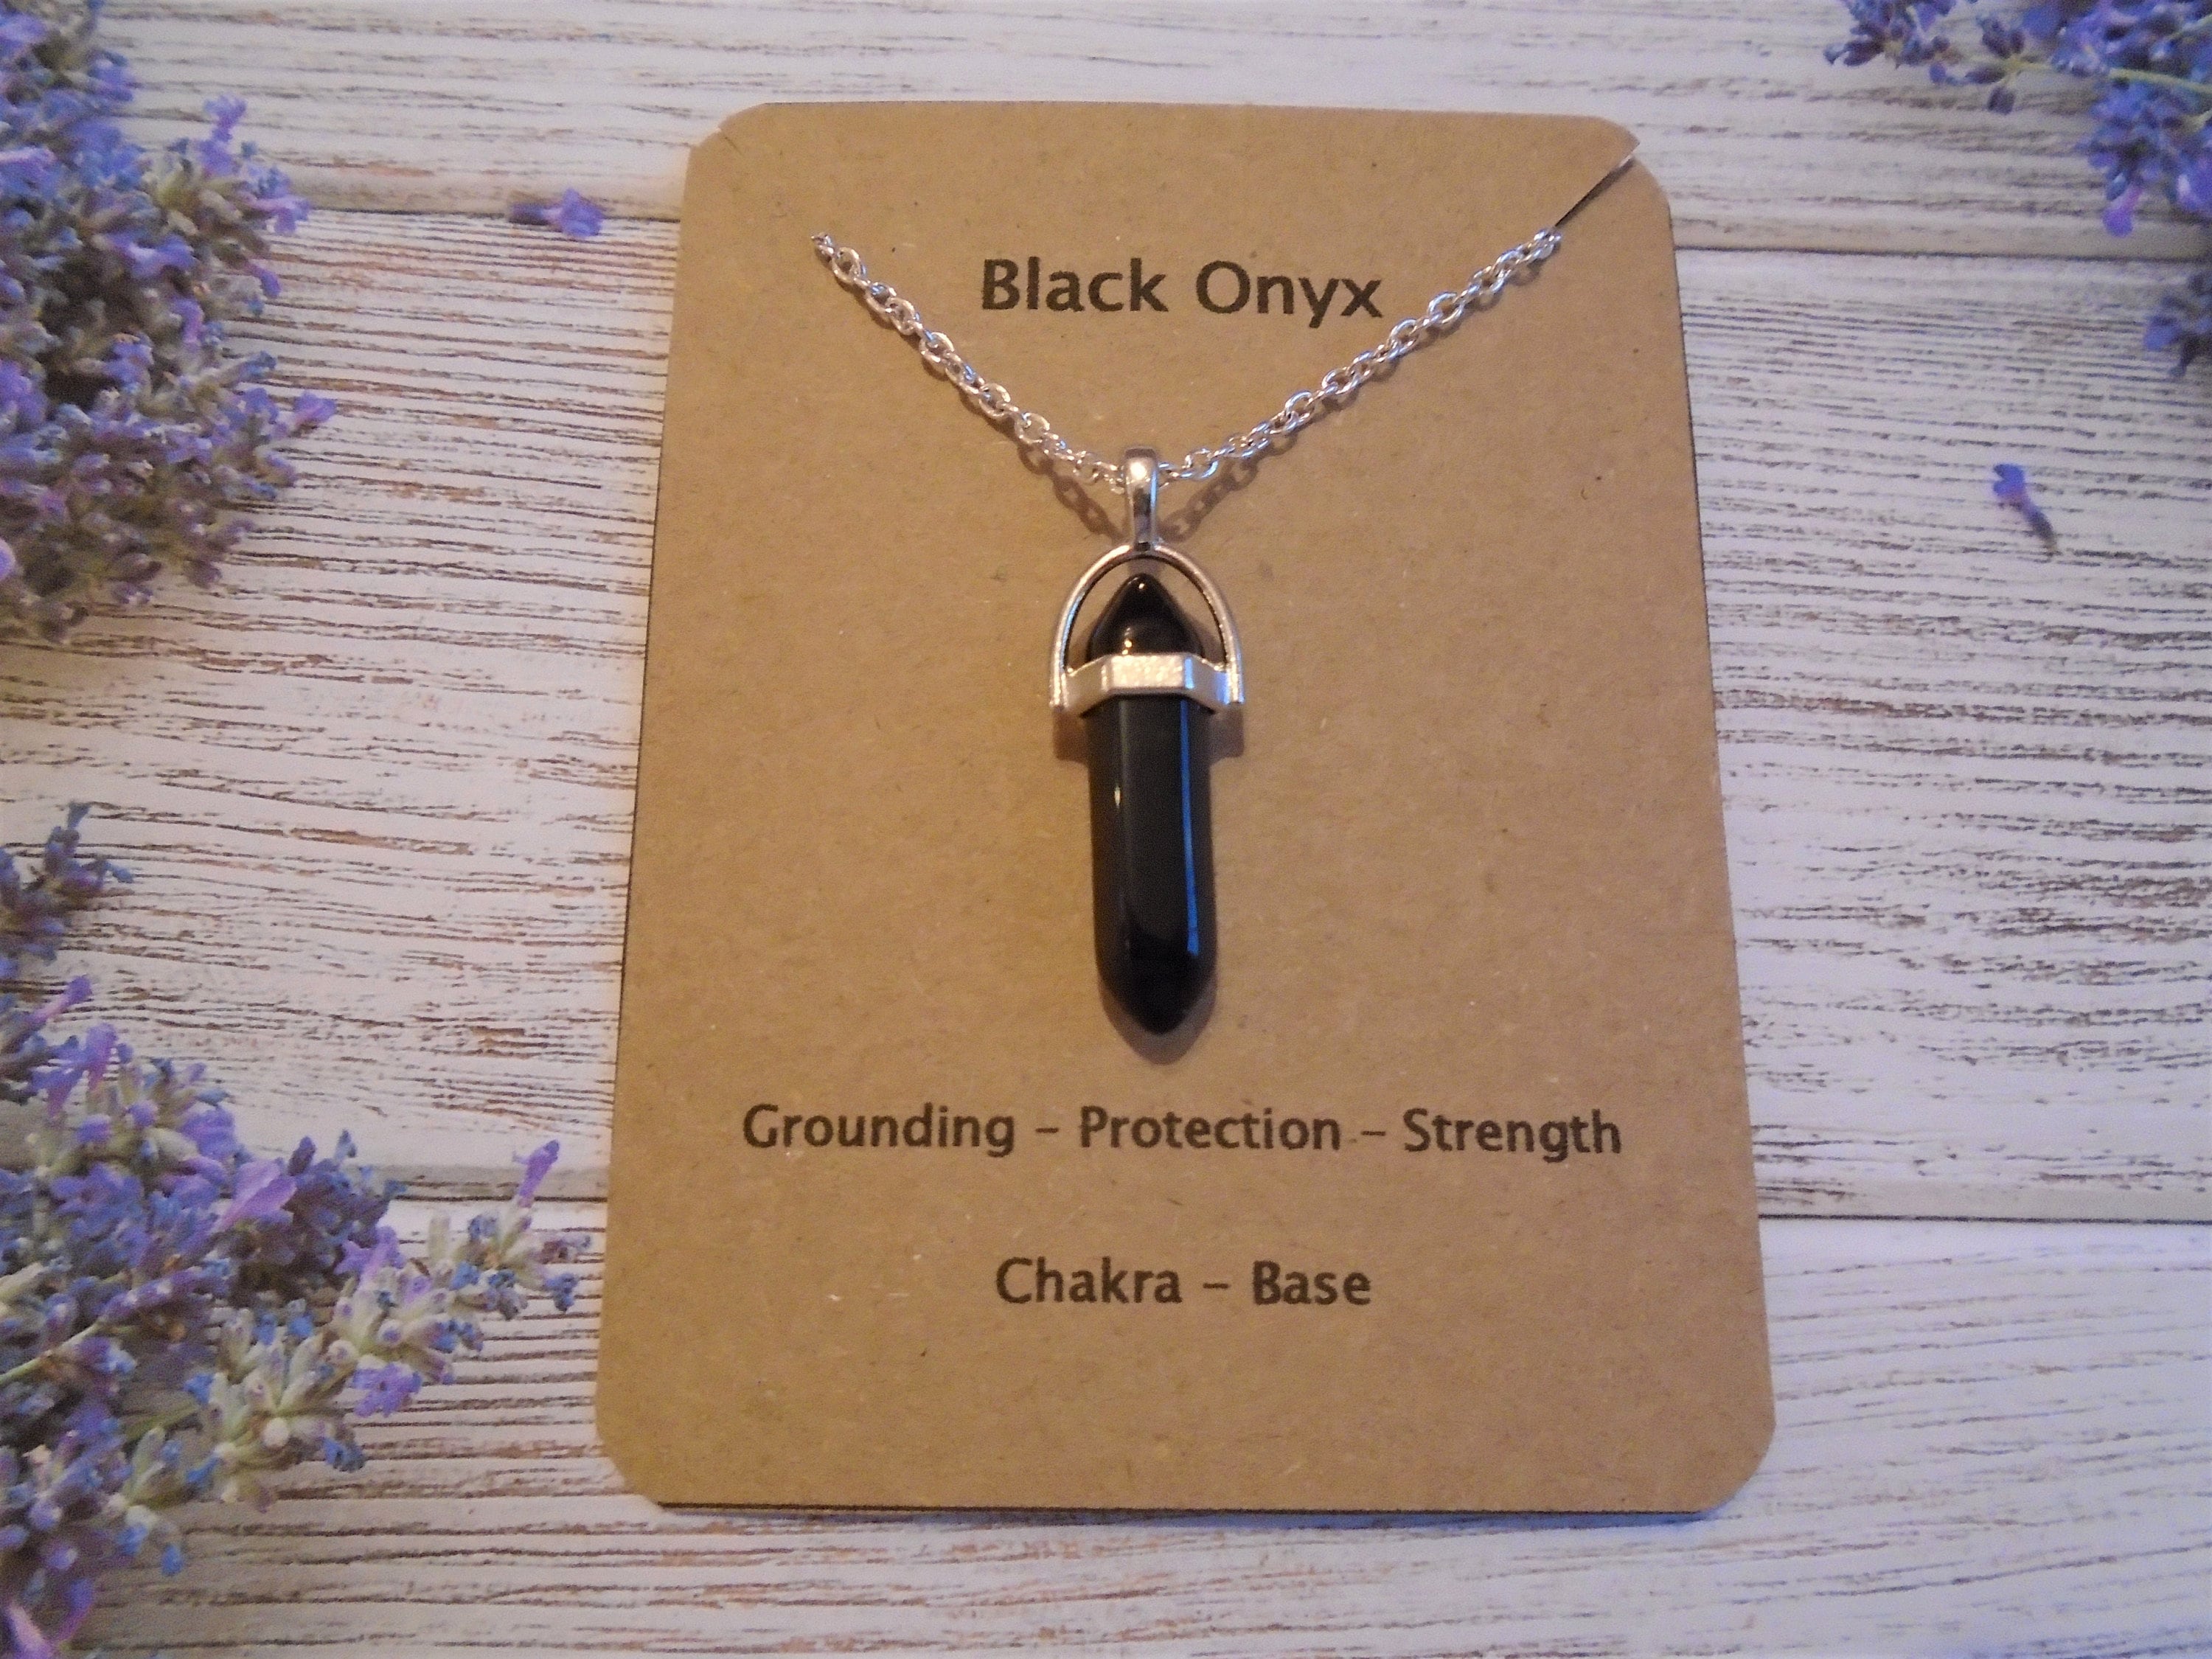 Black Onyx Necklace Protection Necklace Crystal Healing | Etsy